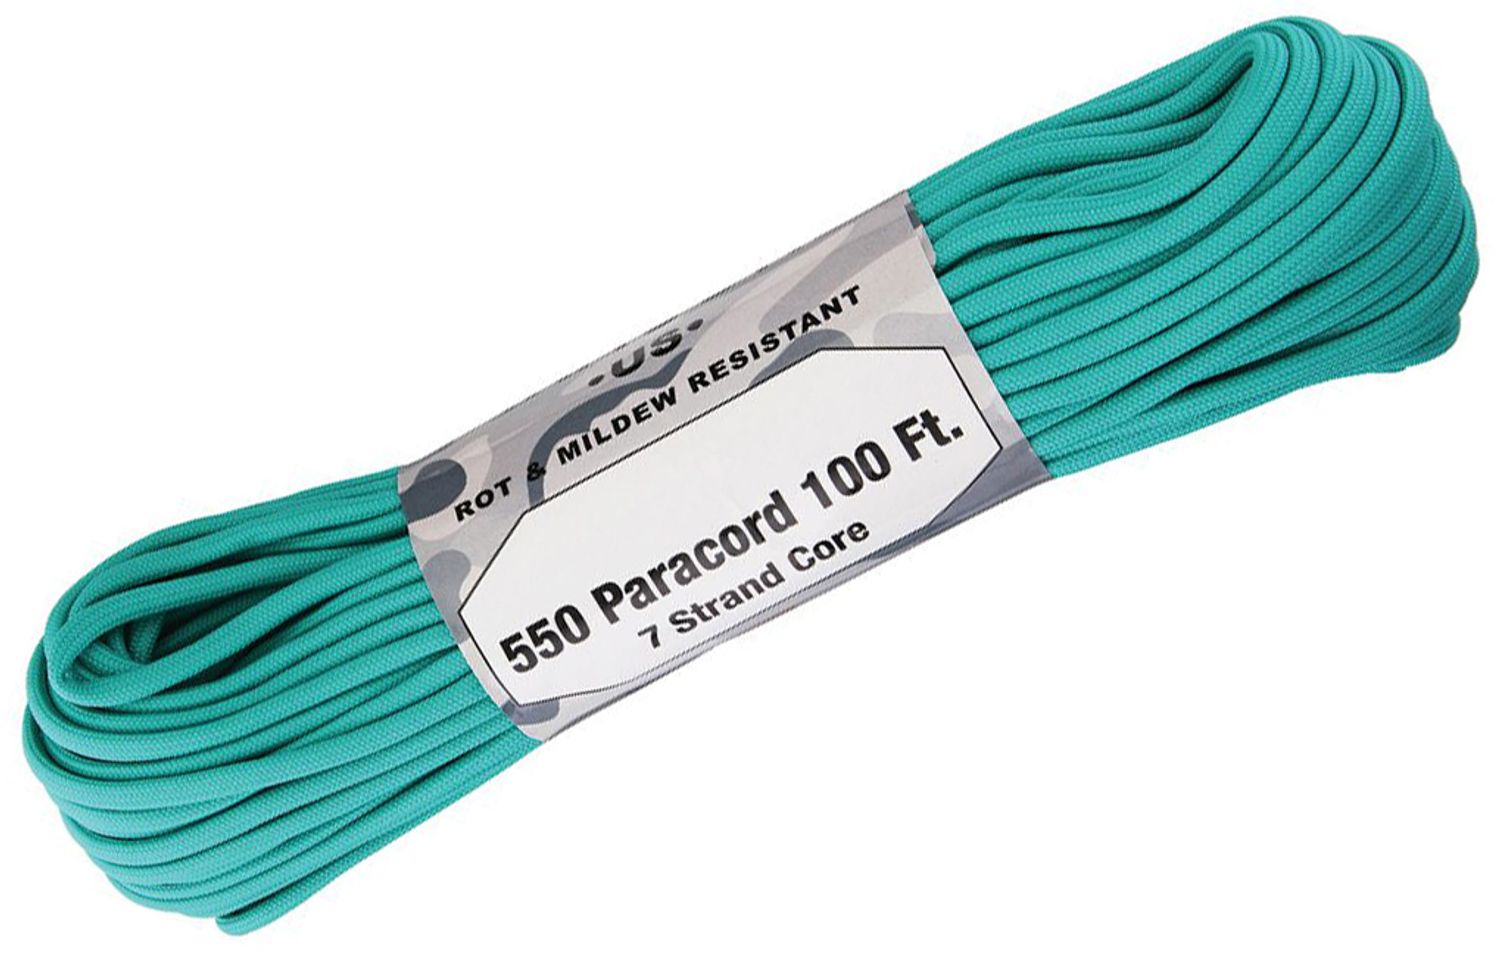 Atwood Rope 550 Paracord, Teal Green, 100 Feet - KnifeCenter - RG015H